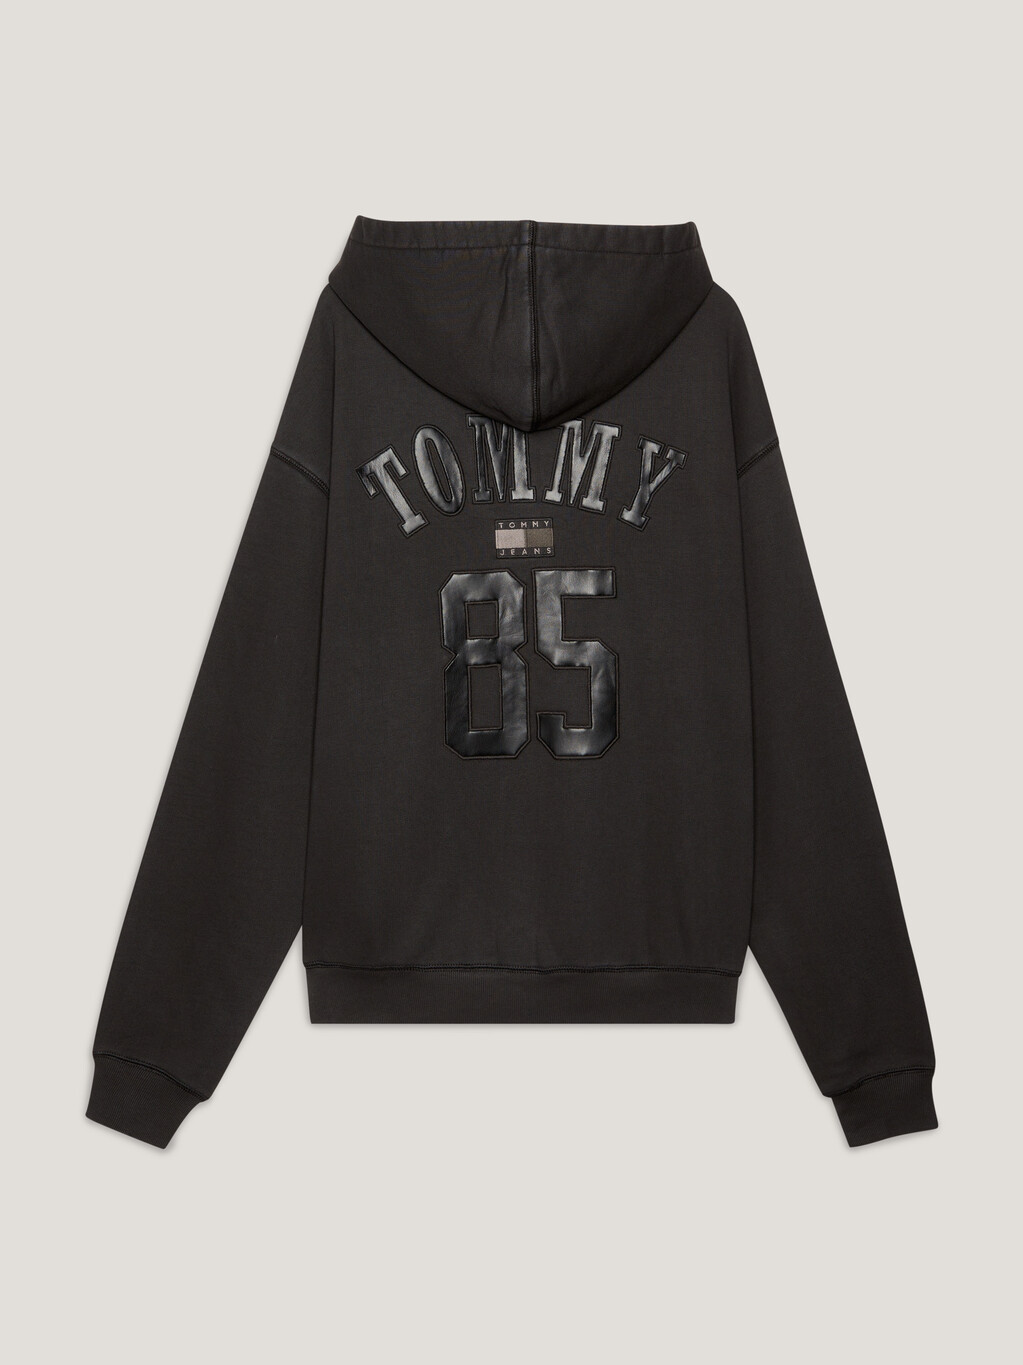 Tommy Remastered Dual Gender 1985 Collection Hoody, Black, hi-res